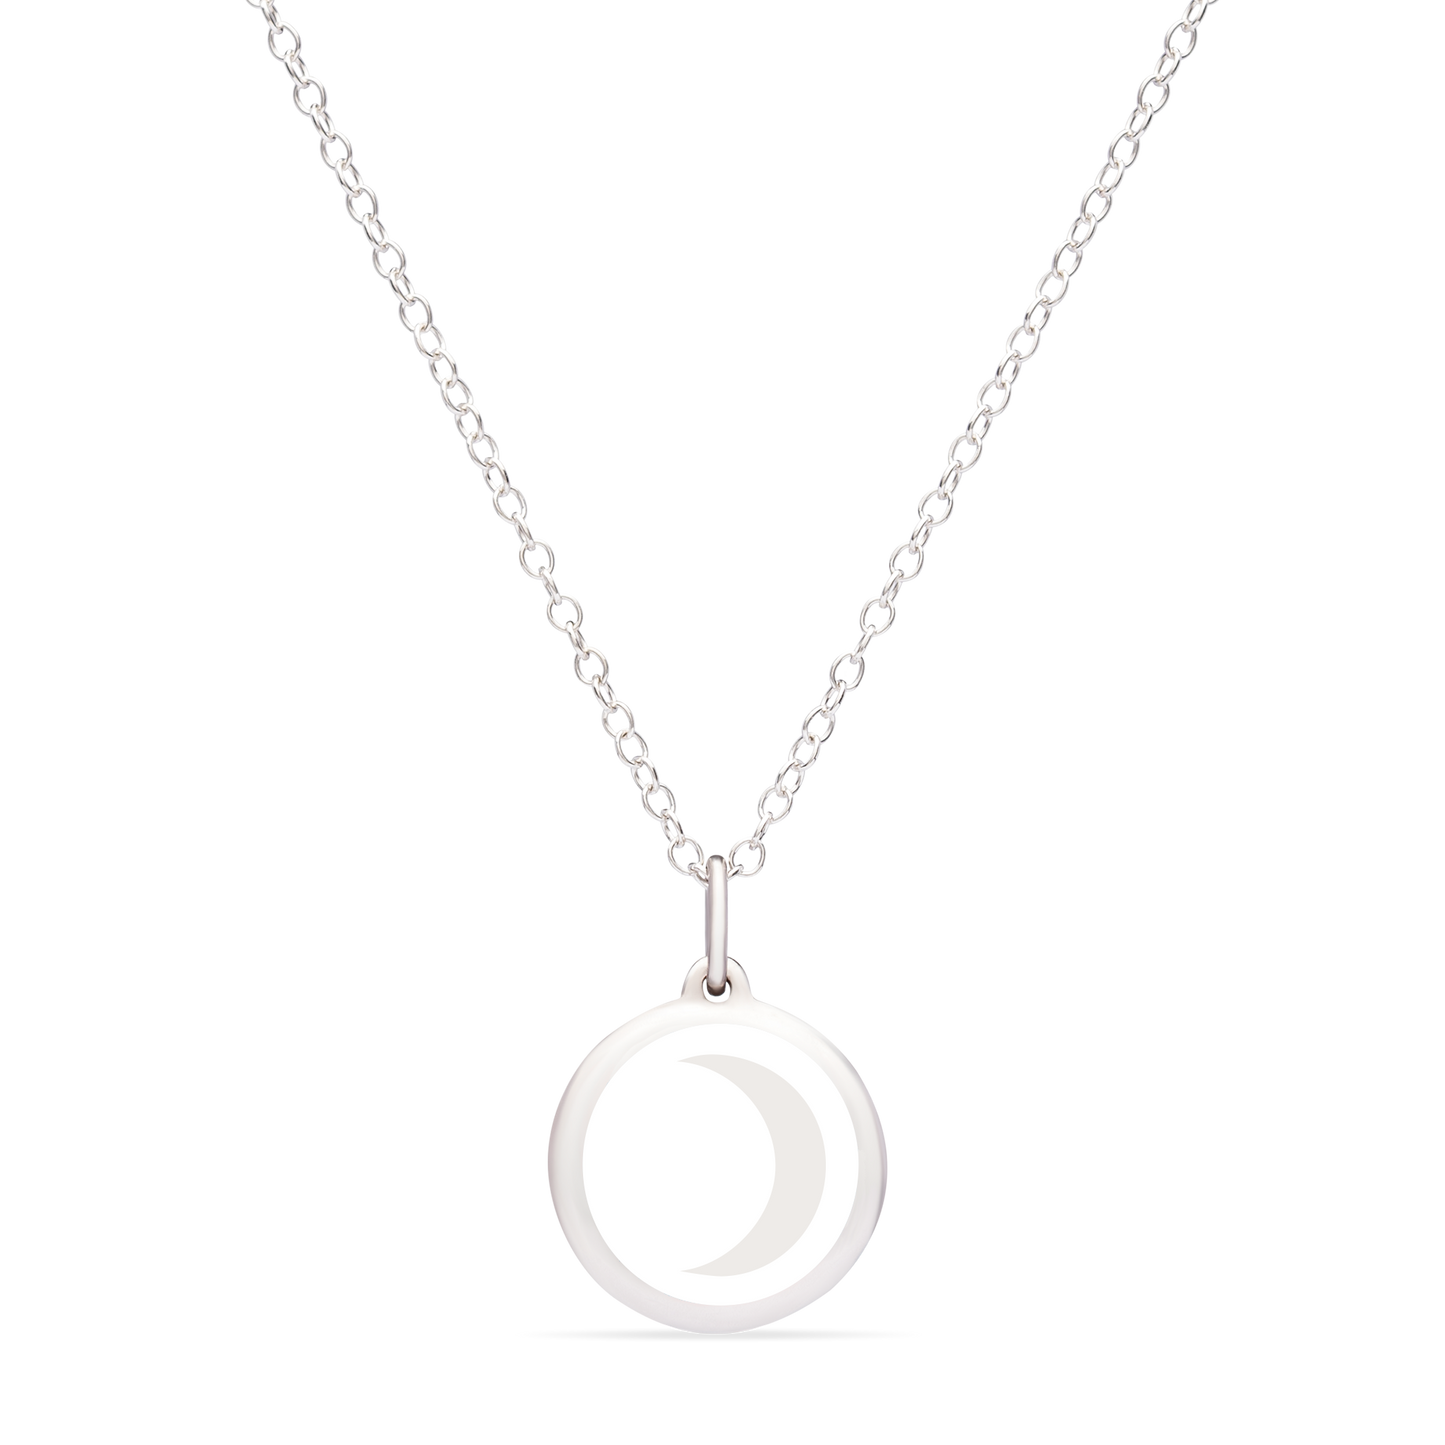 MINI MOON CHARM sterling silver with rhodium plate